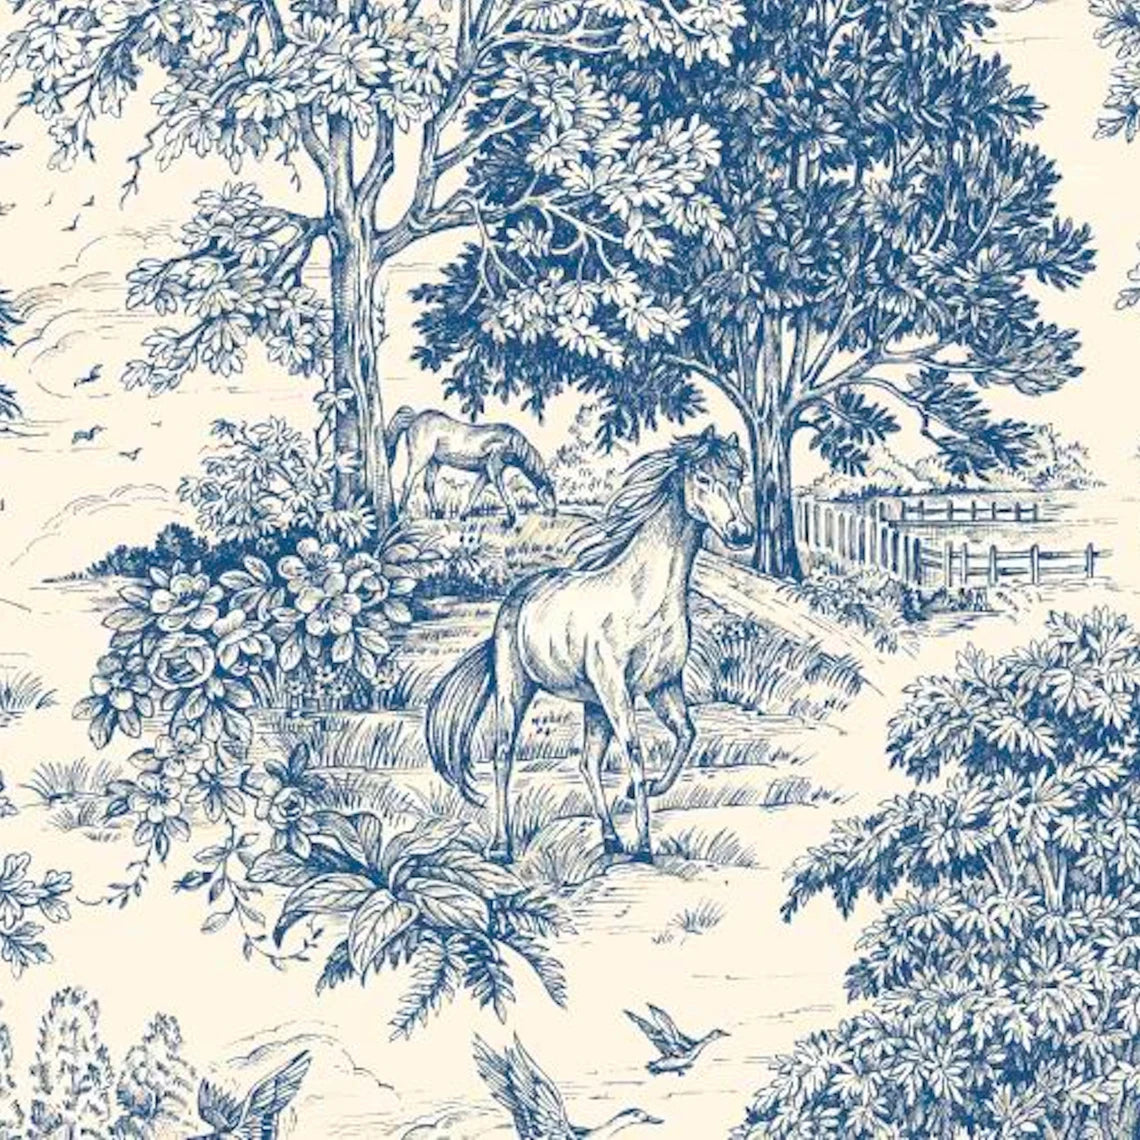 Bed Scarf in Yellowstone Bluebell Blue Country Toile- Horses, Deer, Dogs- Large Scale